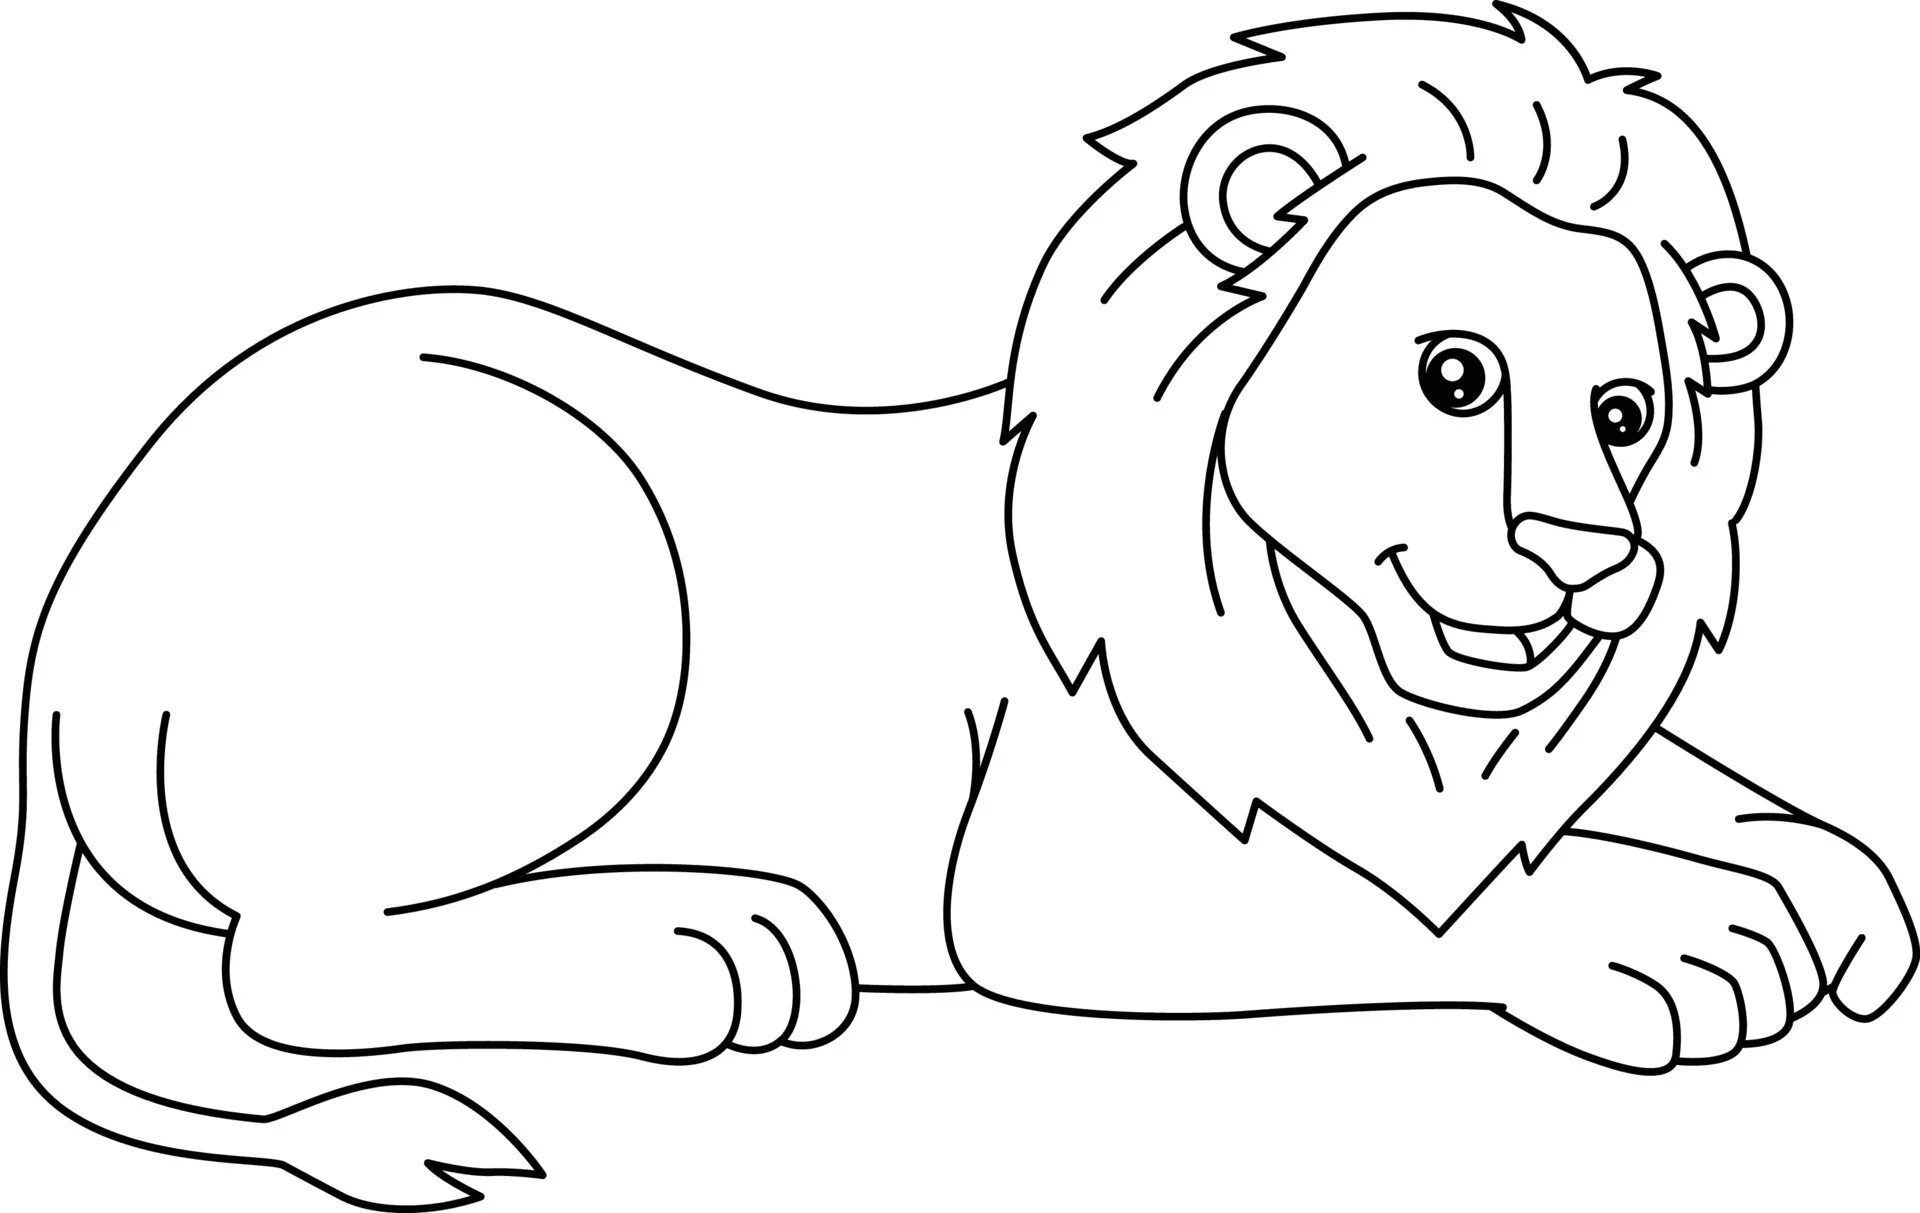 Outstanding lion coloring page for 3-4 year olds